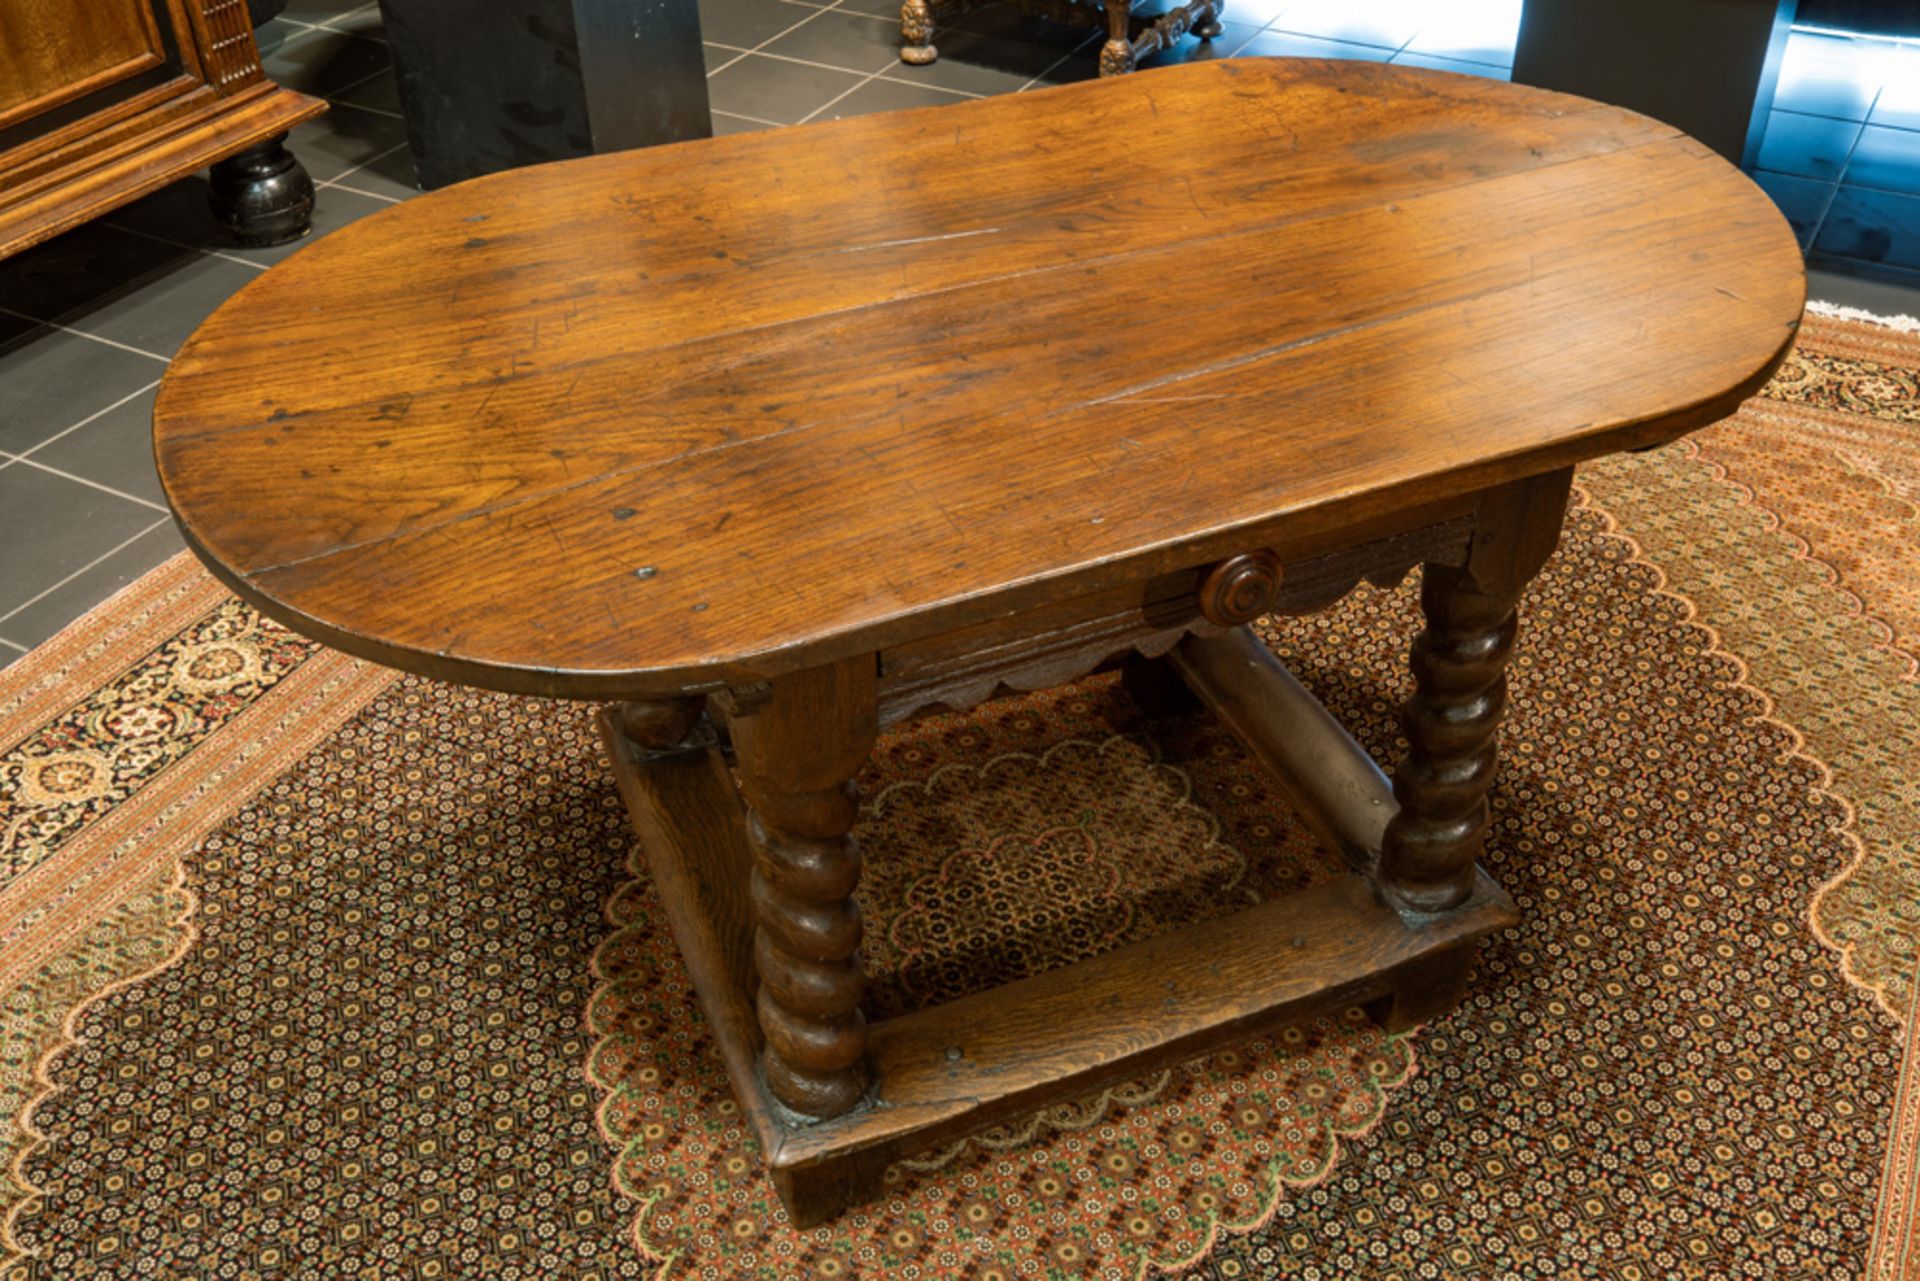 17th/18th Cent. Flemish oak table with oval top and drawer || Zeventiende/achttiende eeuwse - Image 2 of 3